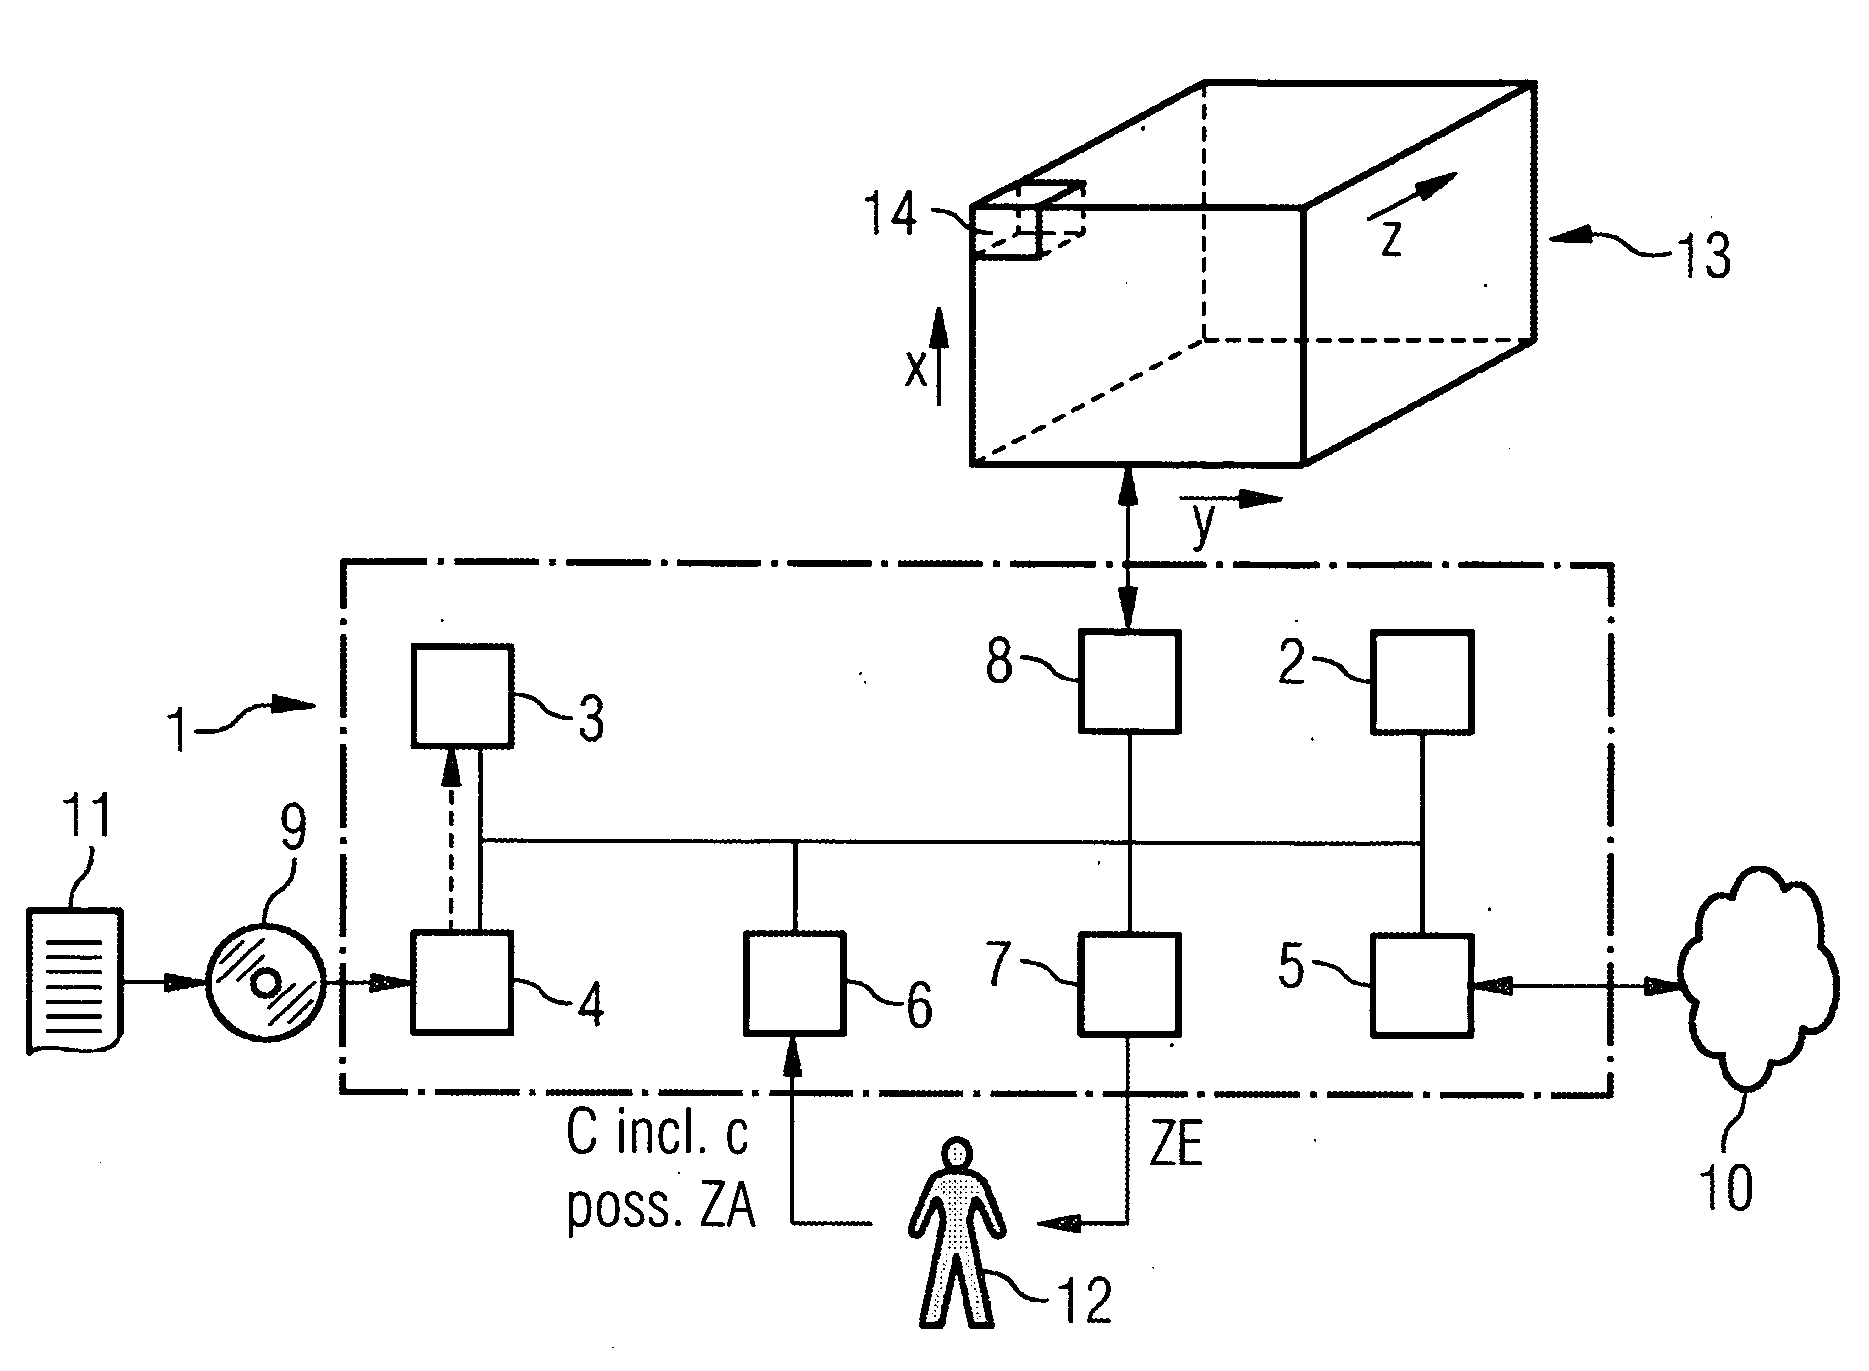 Method of Modeling the Time Gradient of the State of a Steel Volume by Means of a Computer and Corresponding Objects